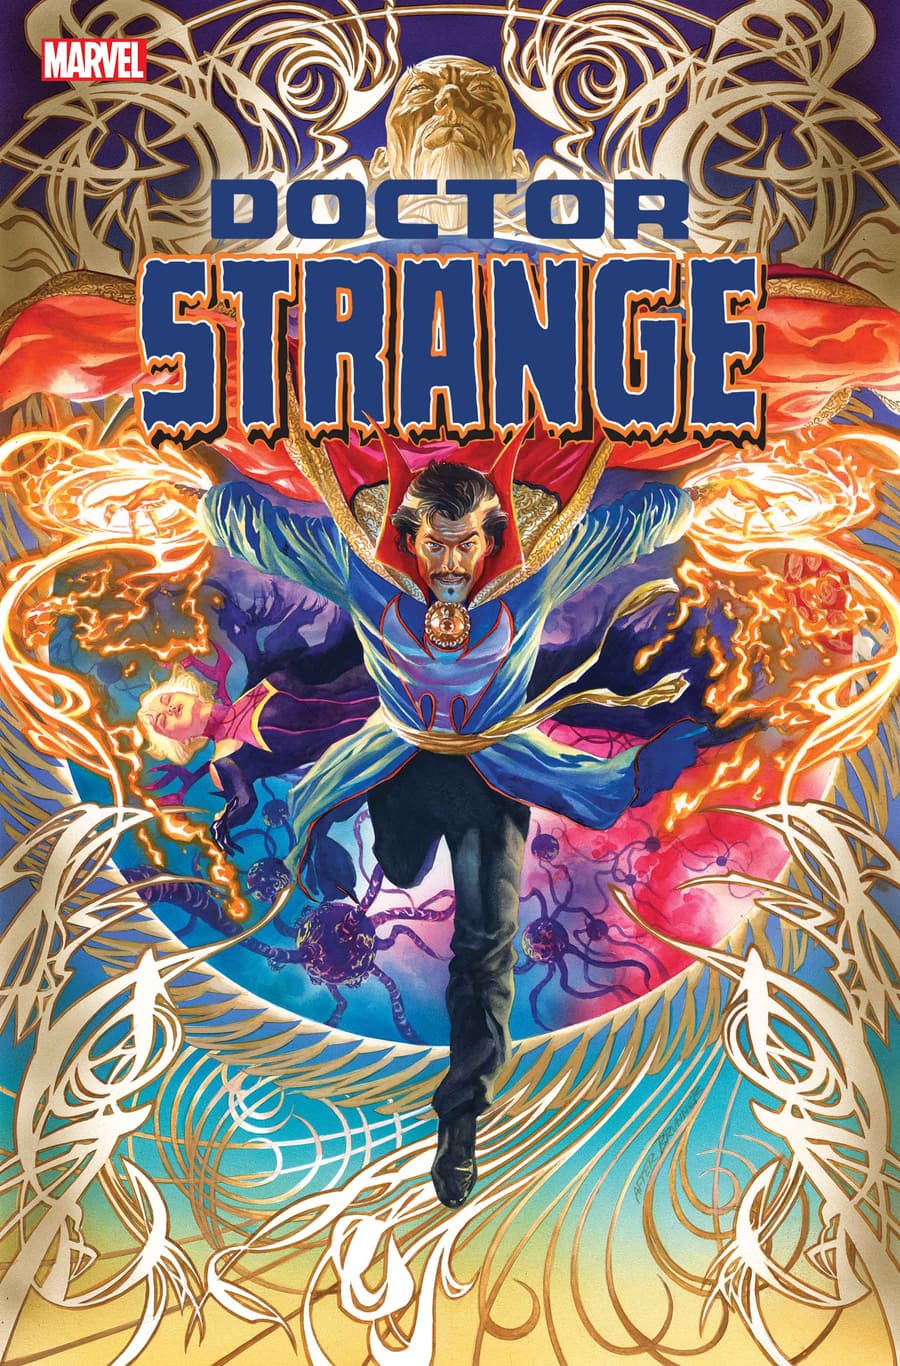 DOCTOR STRANGE #1 cover by Alex Ross